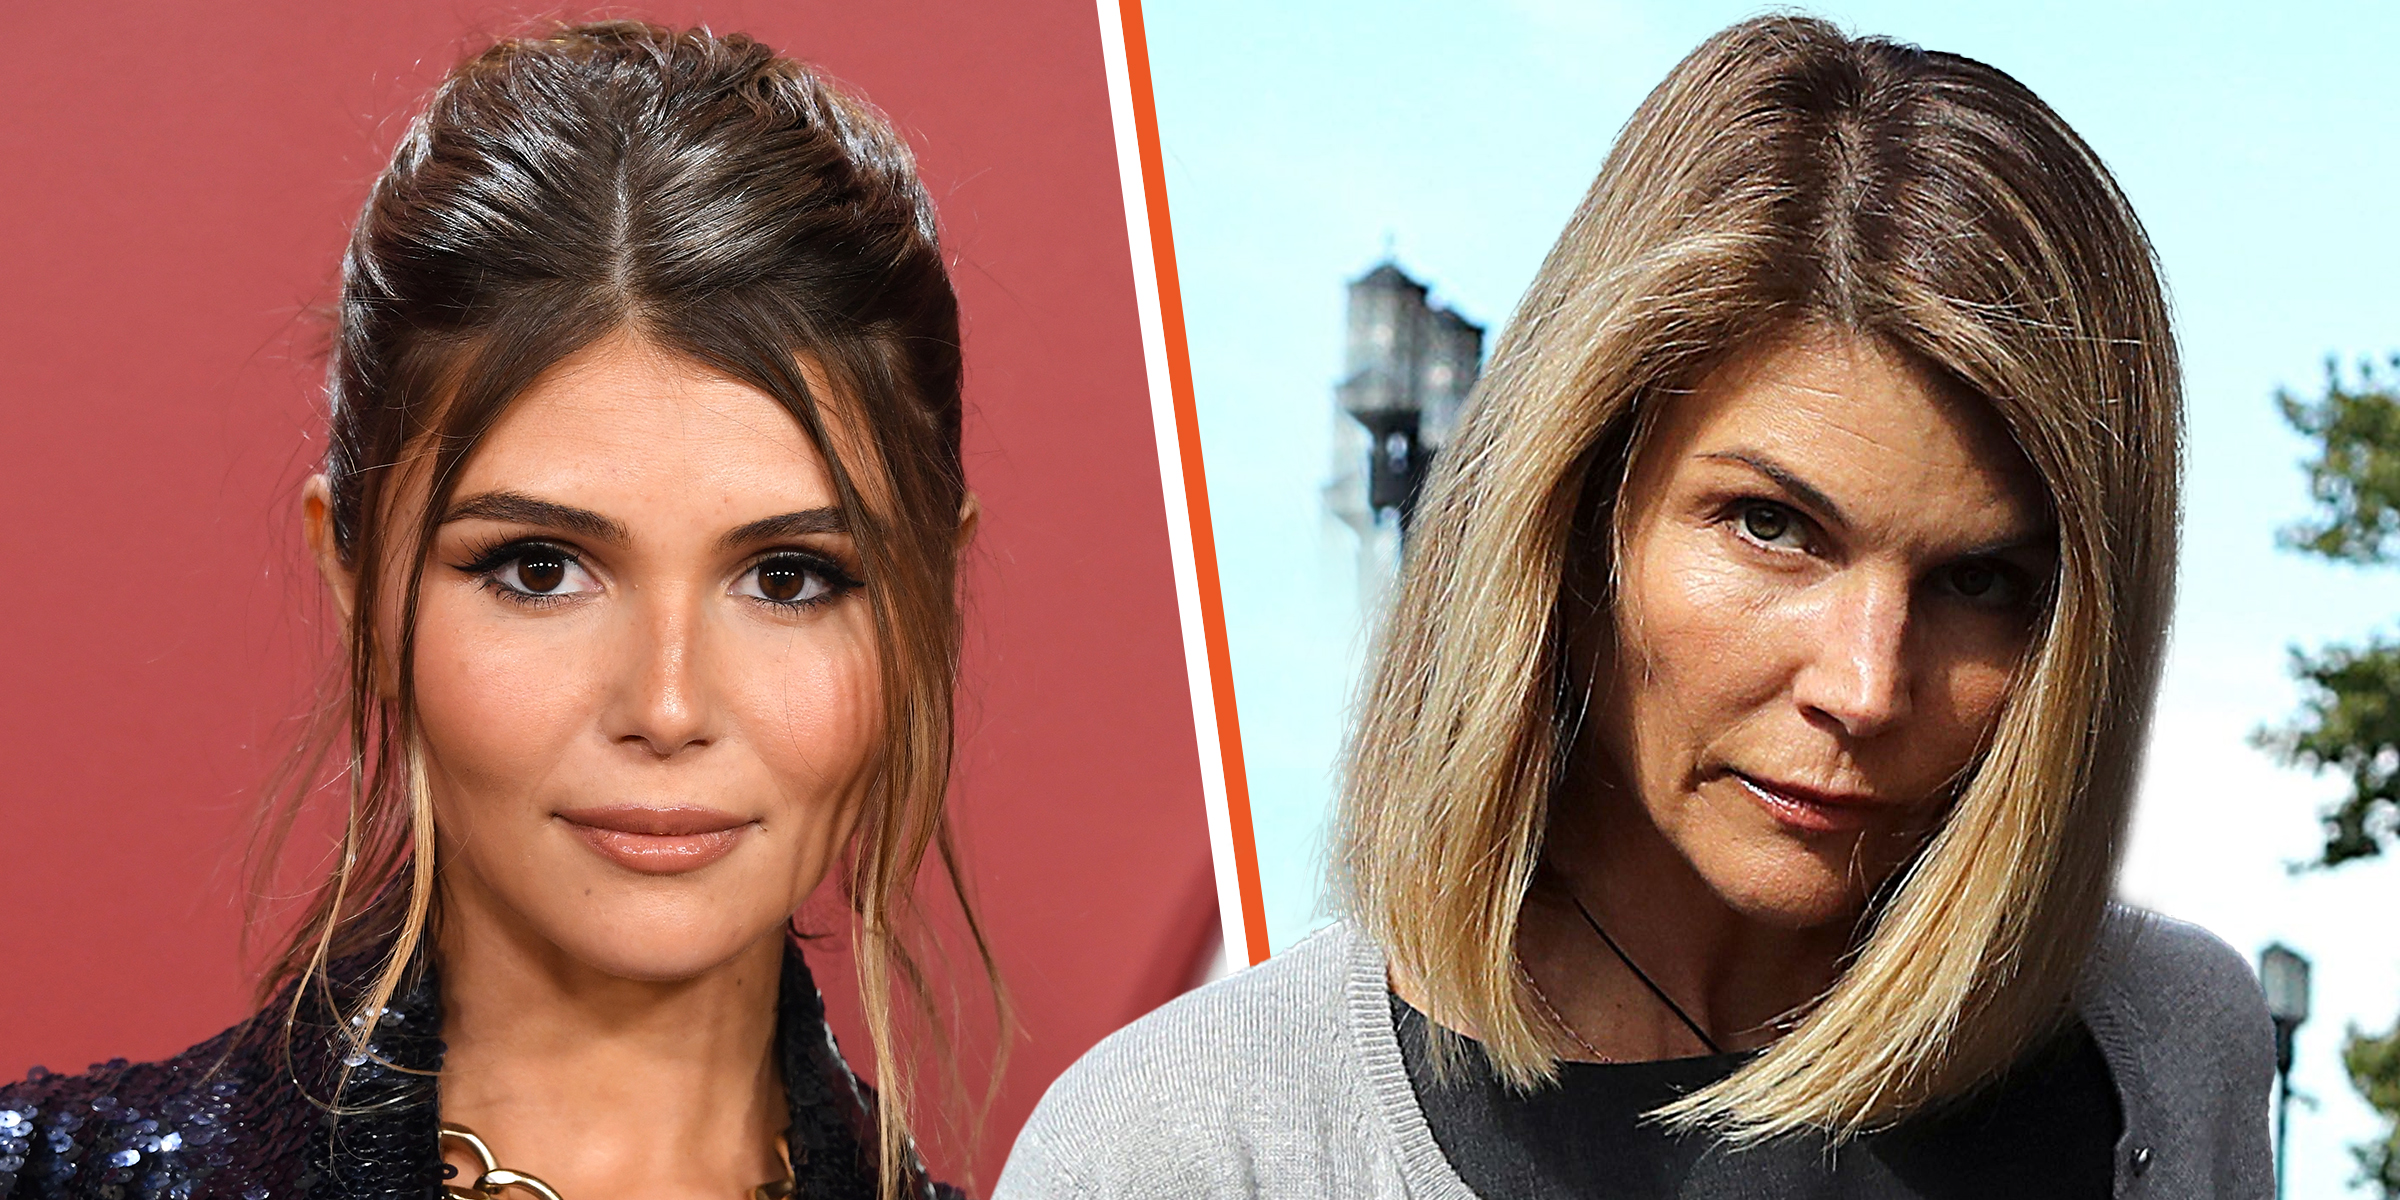 Olivia Jade and Lori Loughlin | Source: Getty Images